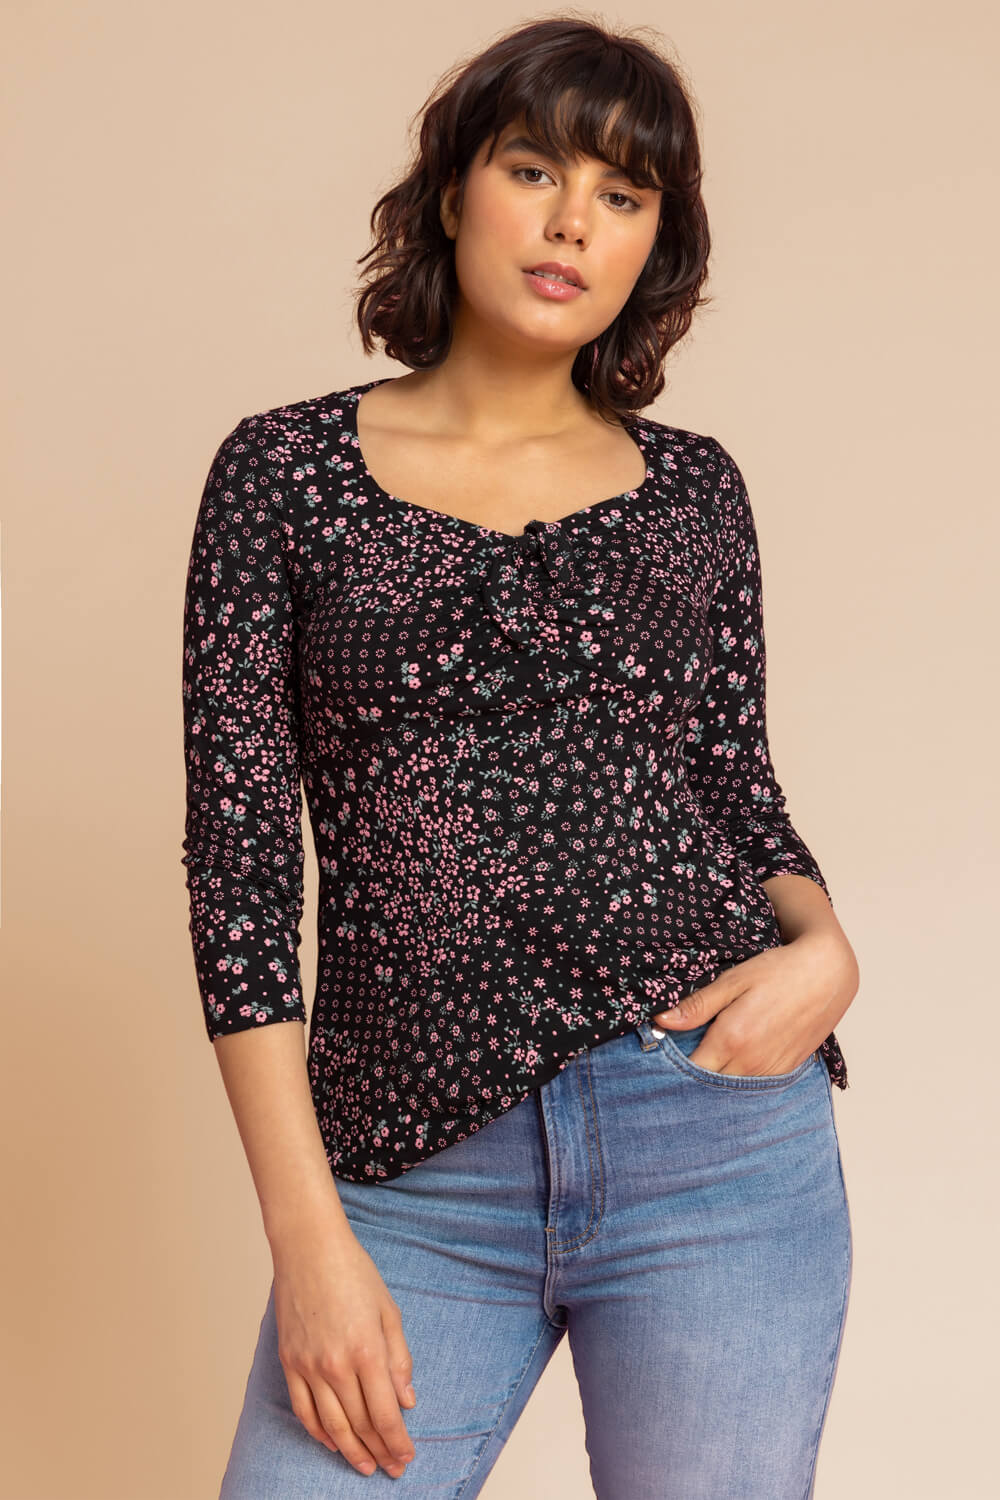 Black Ditsy Floral Print Ruched Top, Image 5 of 5